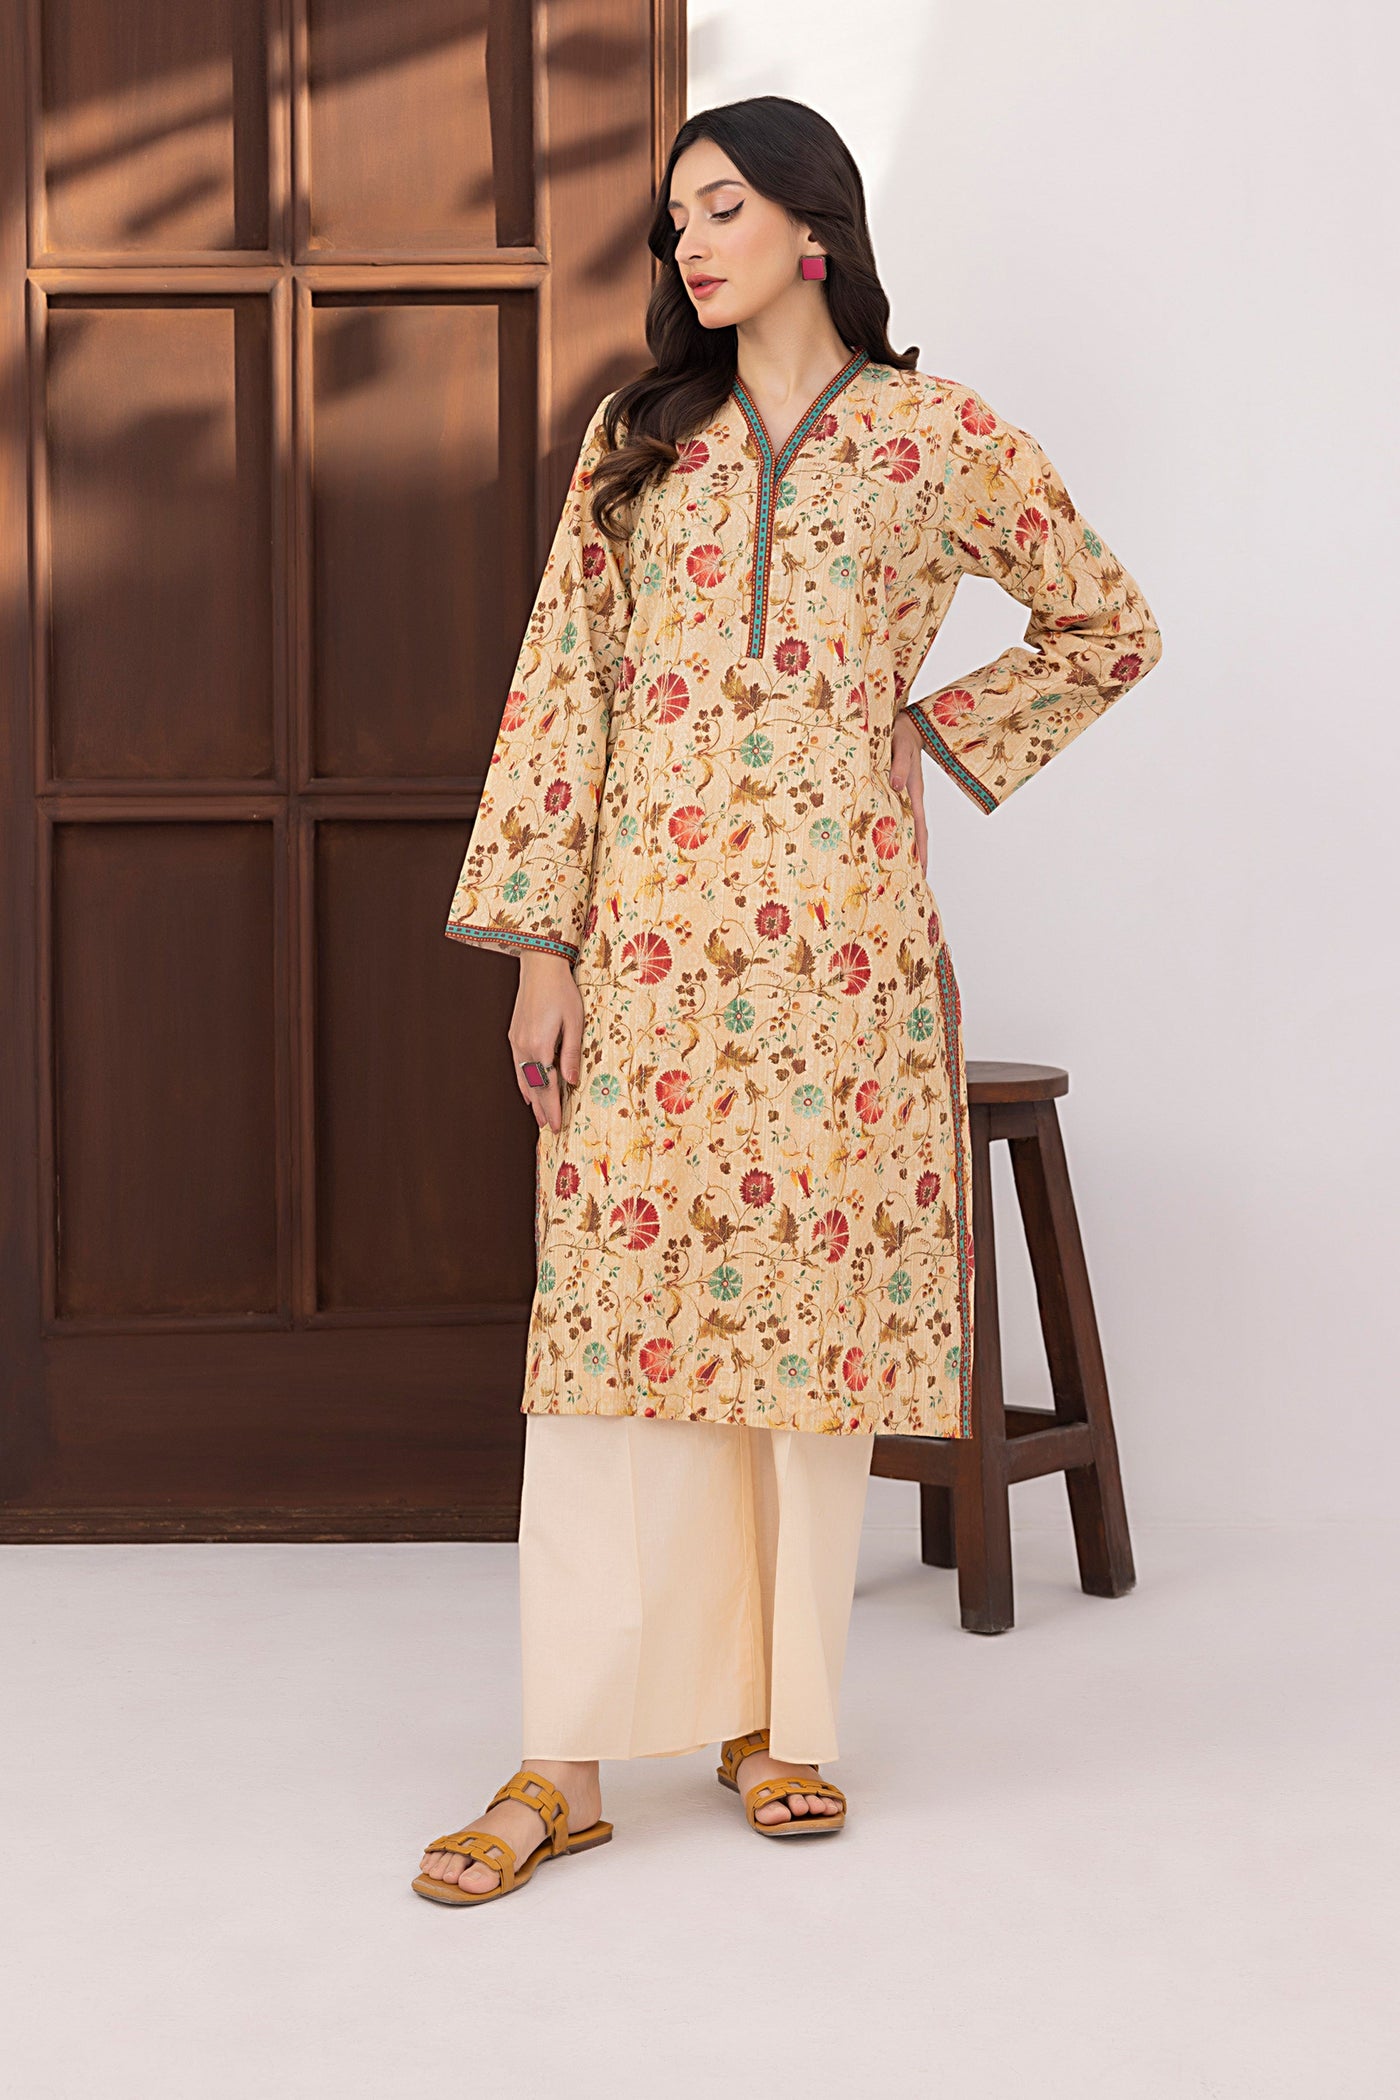 Lakhany 01 Piece Ready to Wear Printed Cambric Shirt - LG-SR-0162